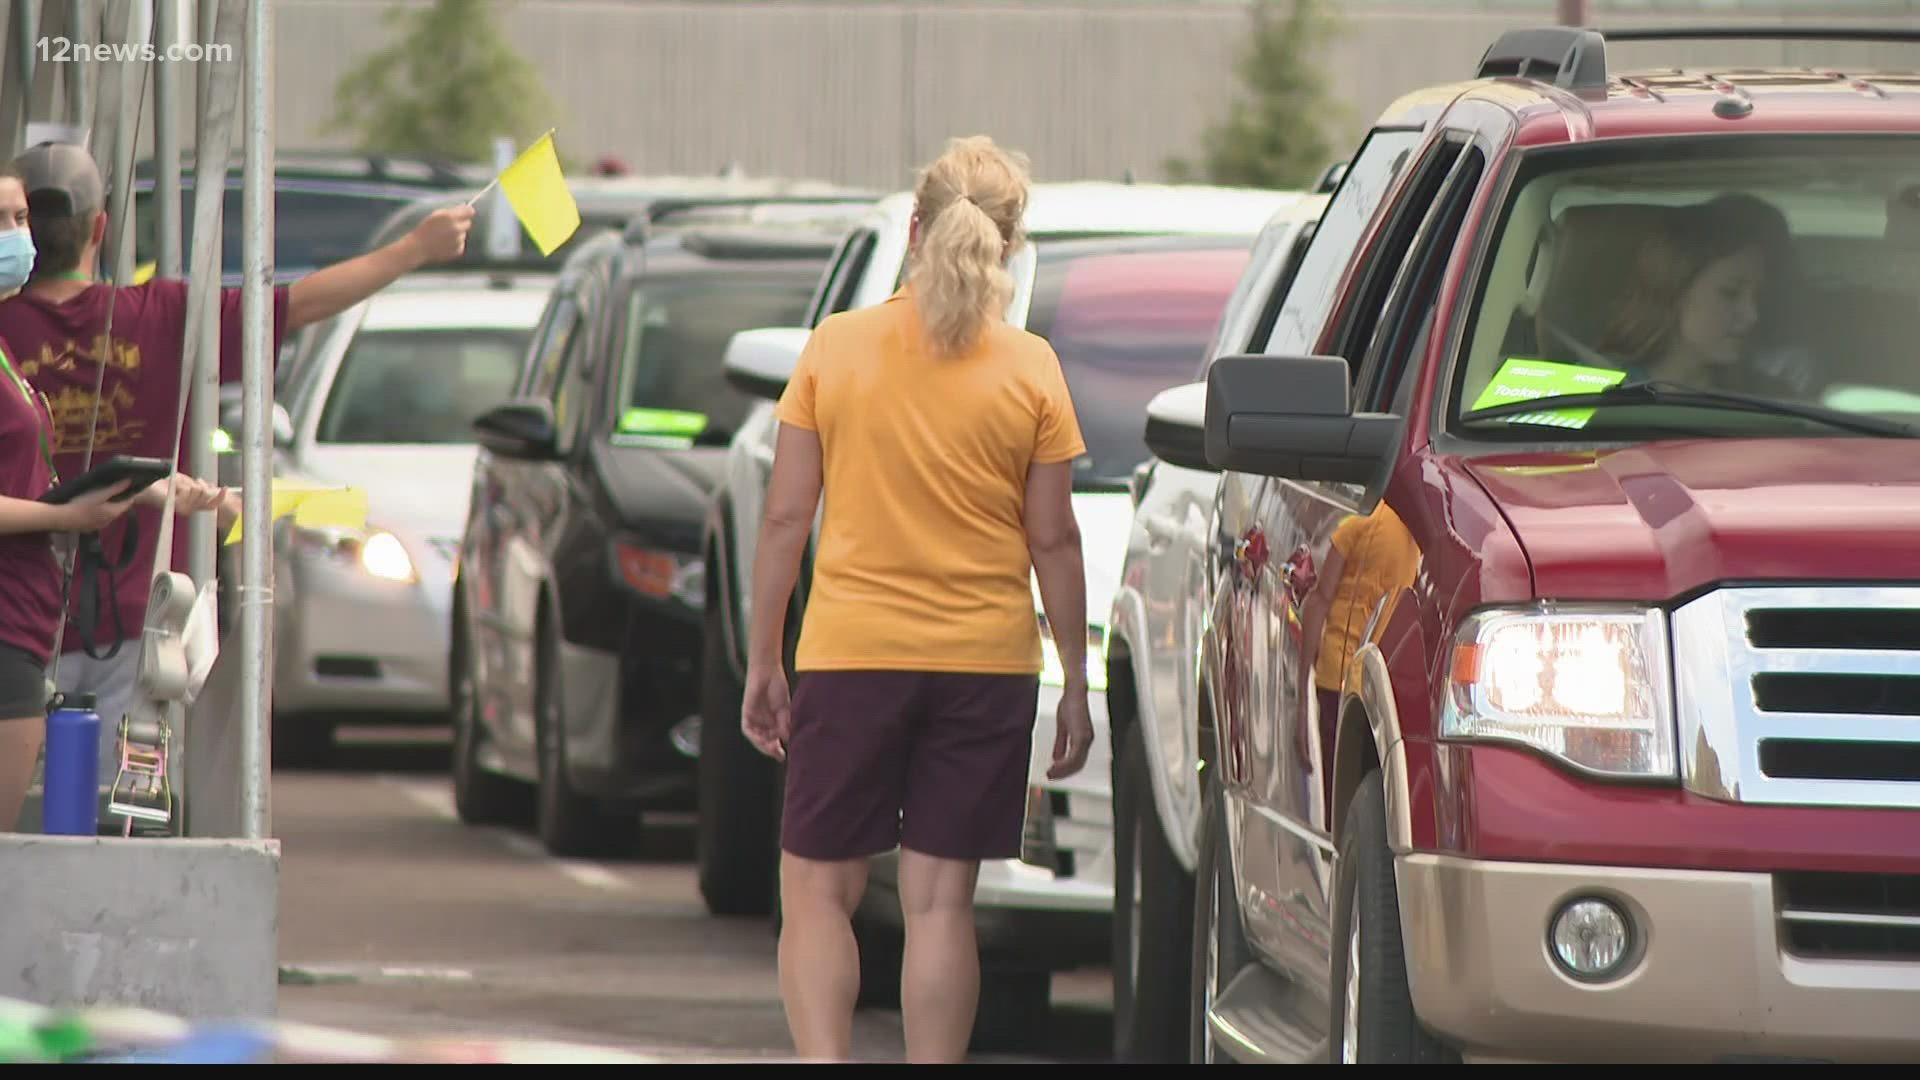 Move-in day was in full swing Thursday bright and early at Arizona State University's Tempe campus.